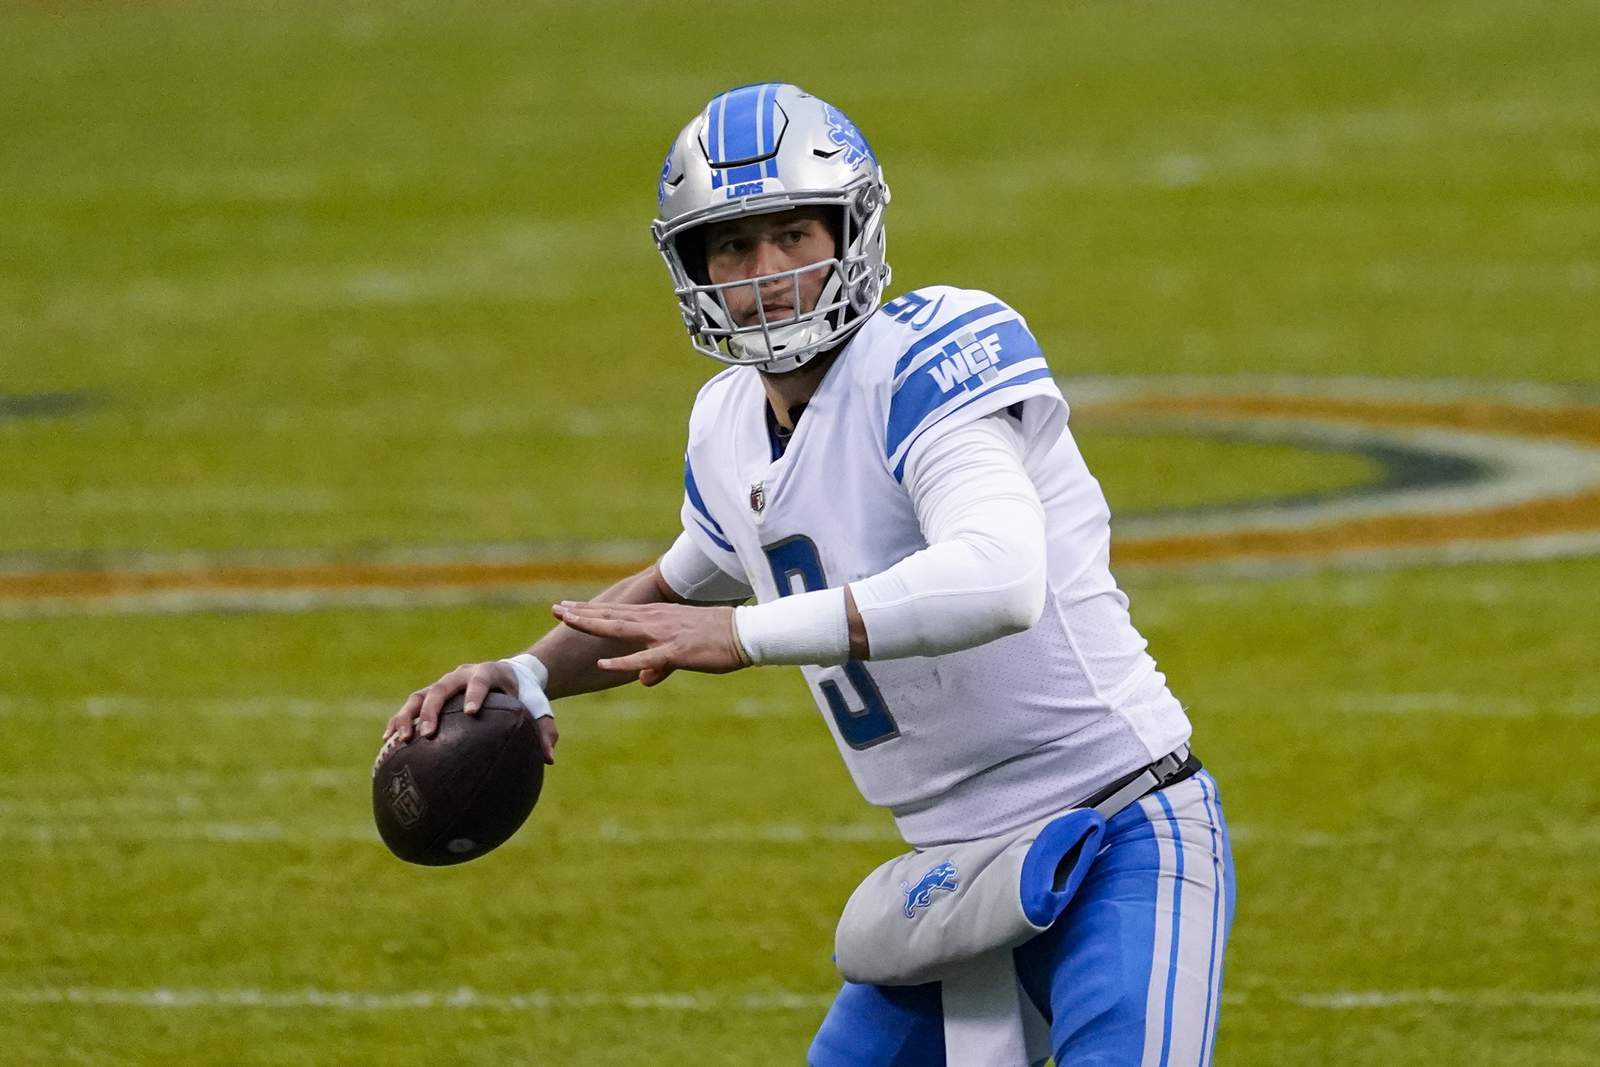 Stafford throws 3 TDs, Lions rally to beat Bears 34-30